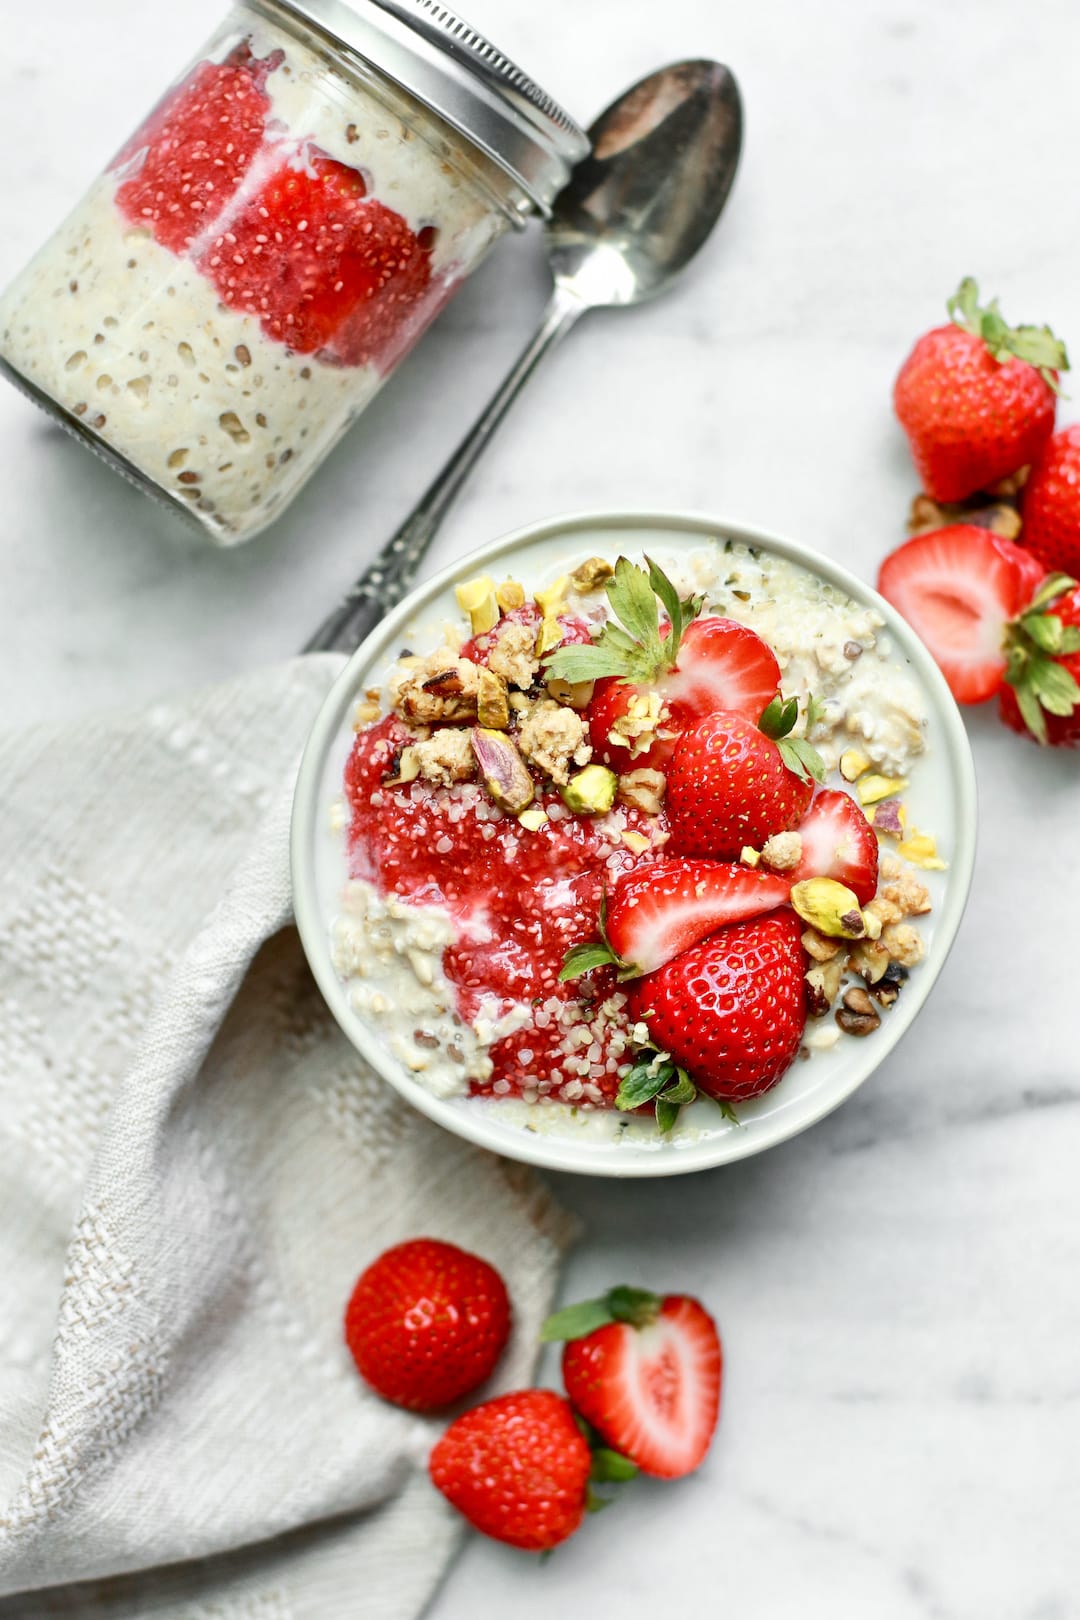 Healthy Strawberry Overnight Oats with Strawberry Chia Seed Jam